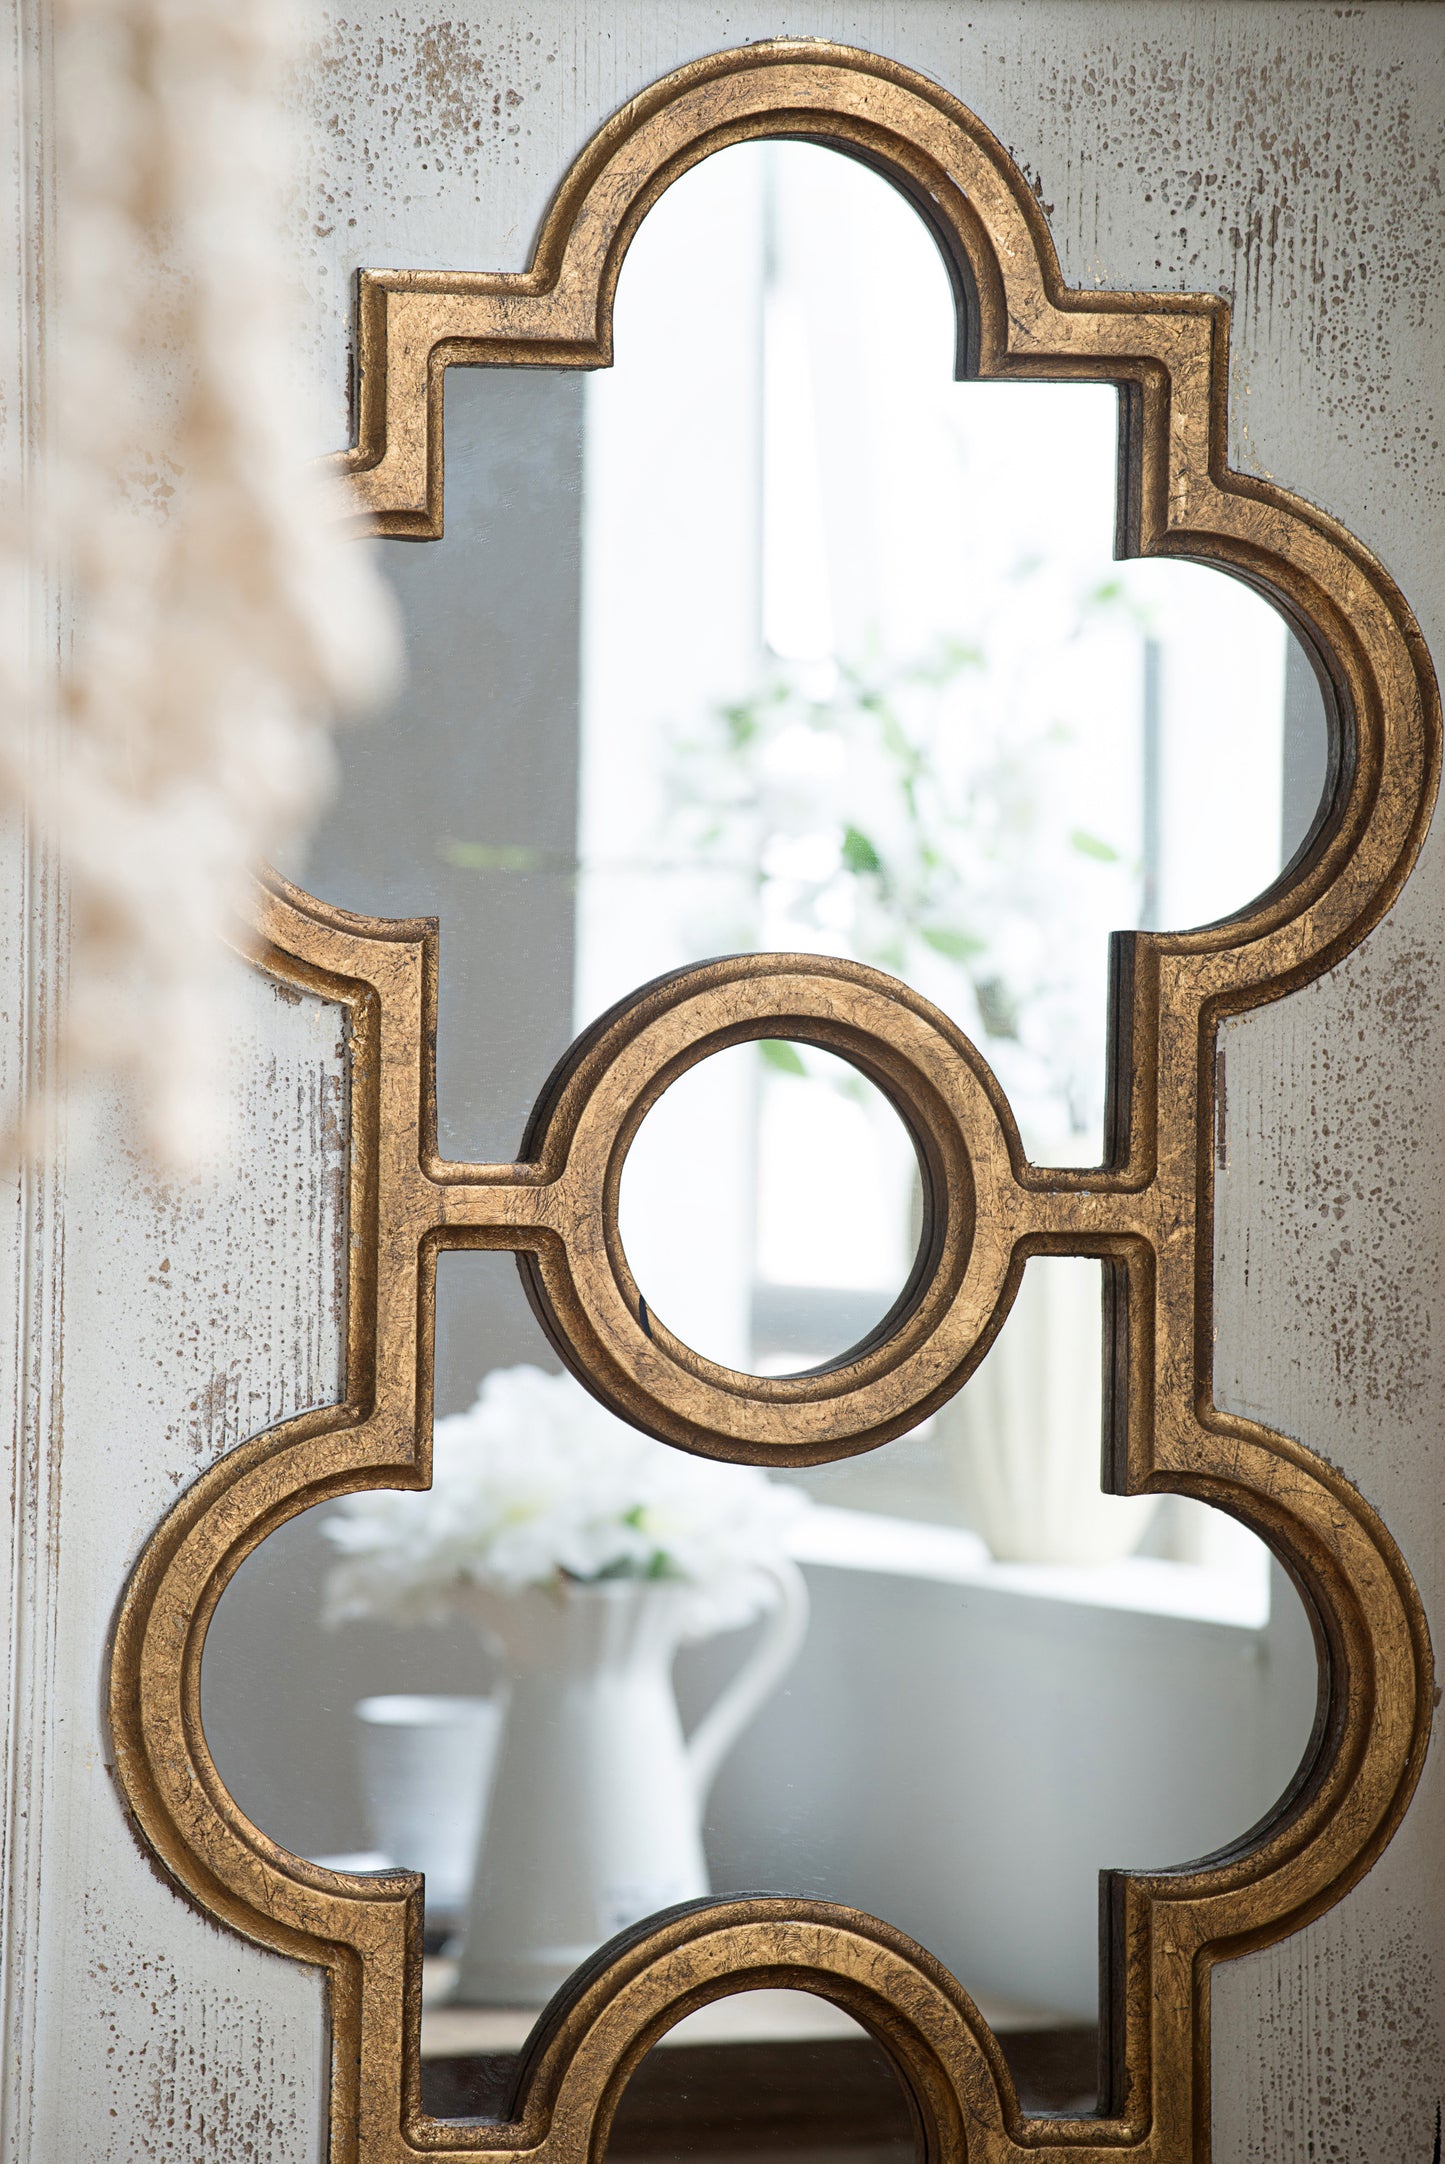 58" x 28" in Classically Inspired Henley Decorative Mirror